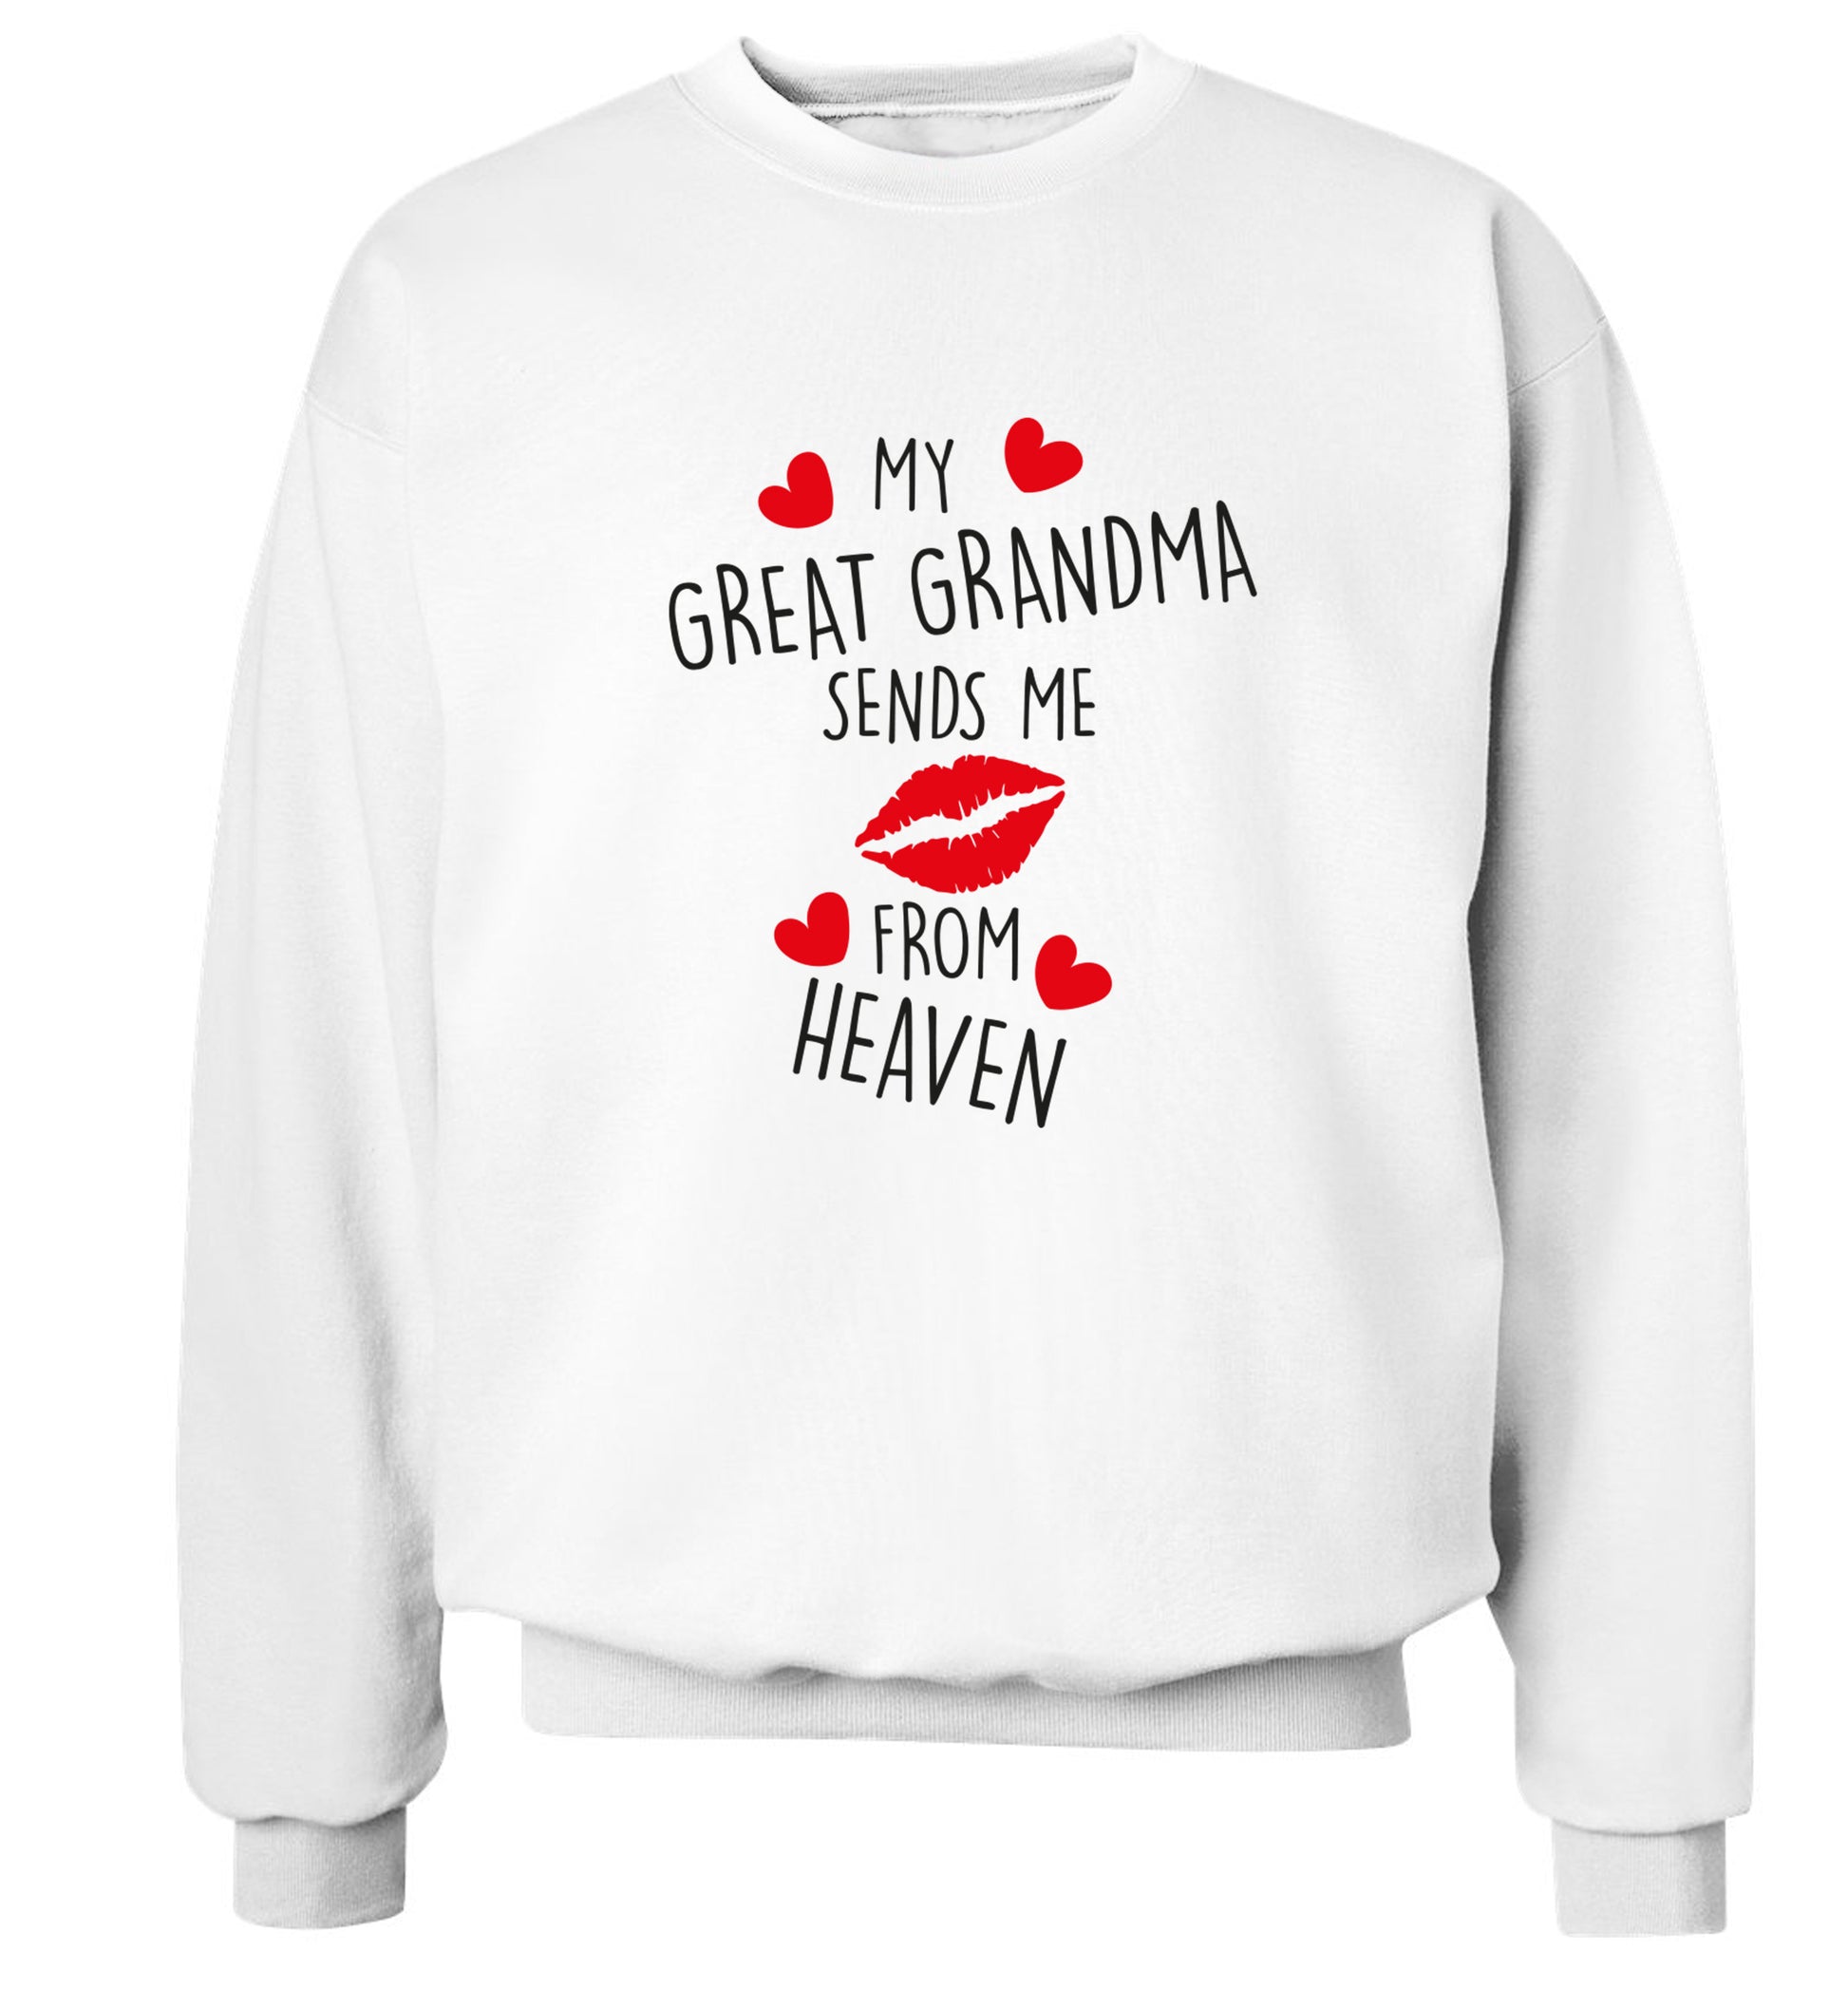 My great grandma sends me kisses from heaven Adult's unisex white Sweater 2XL